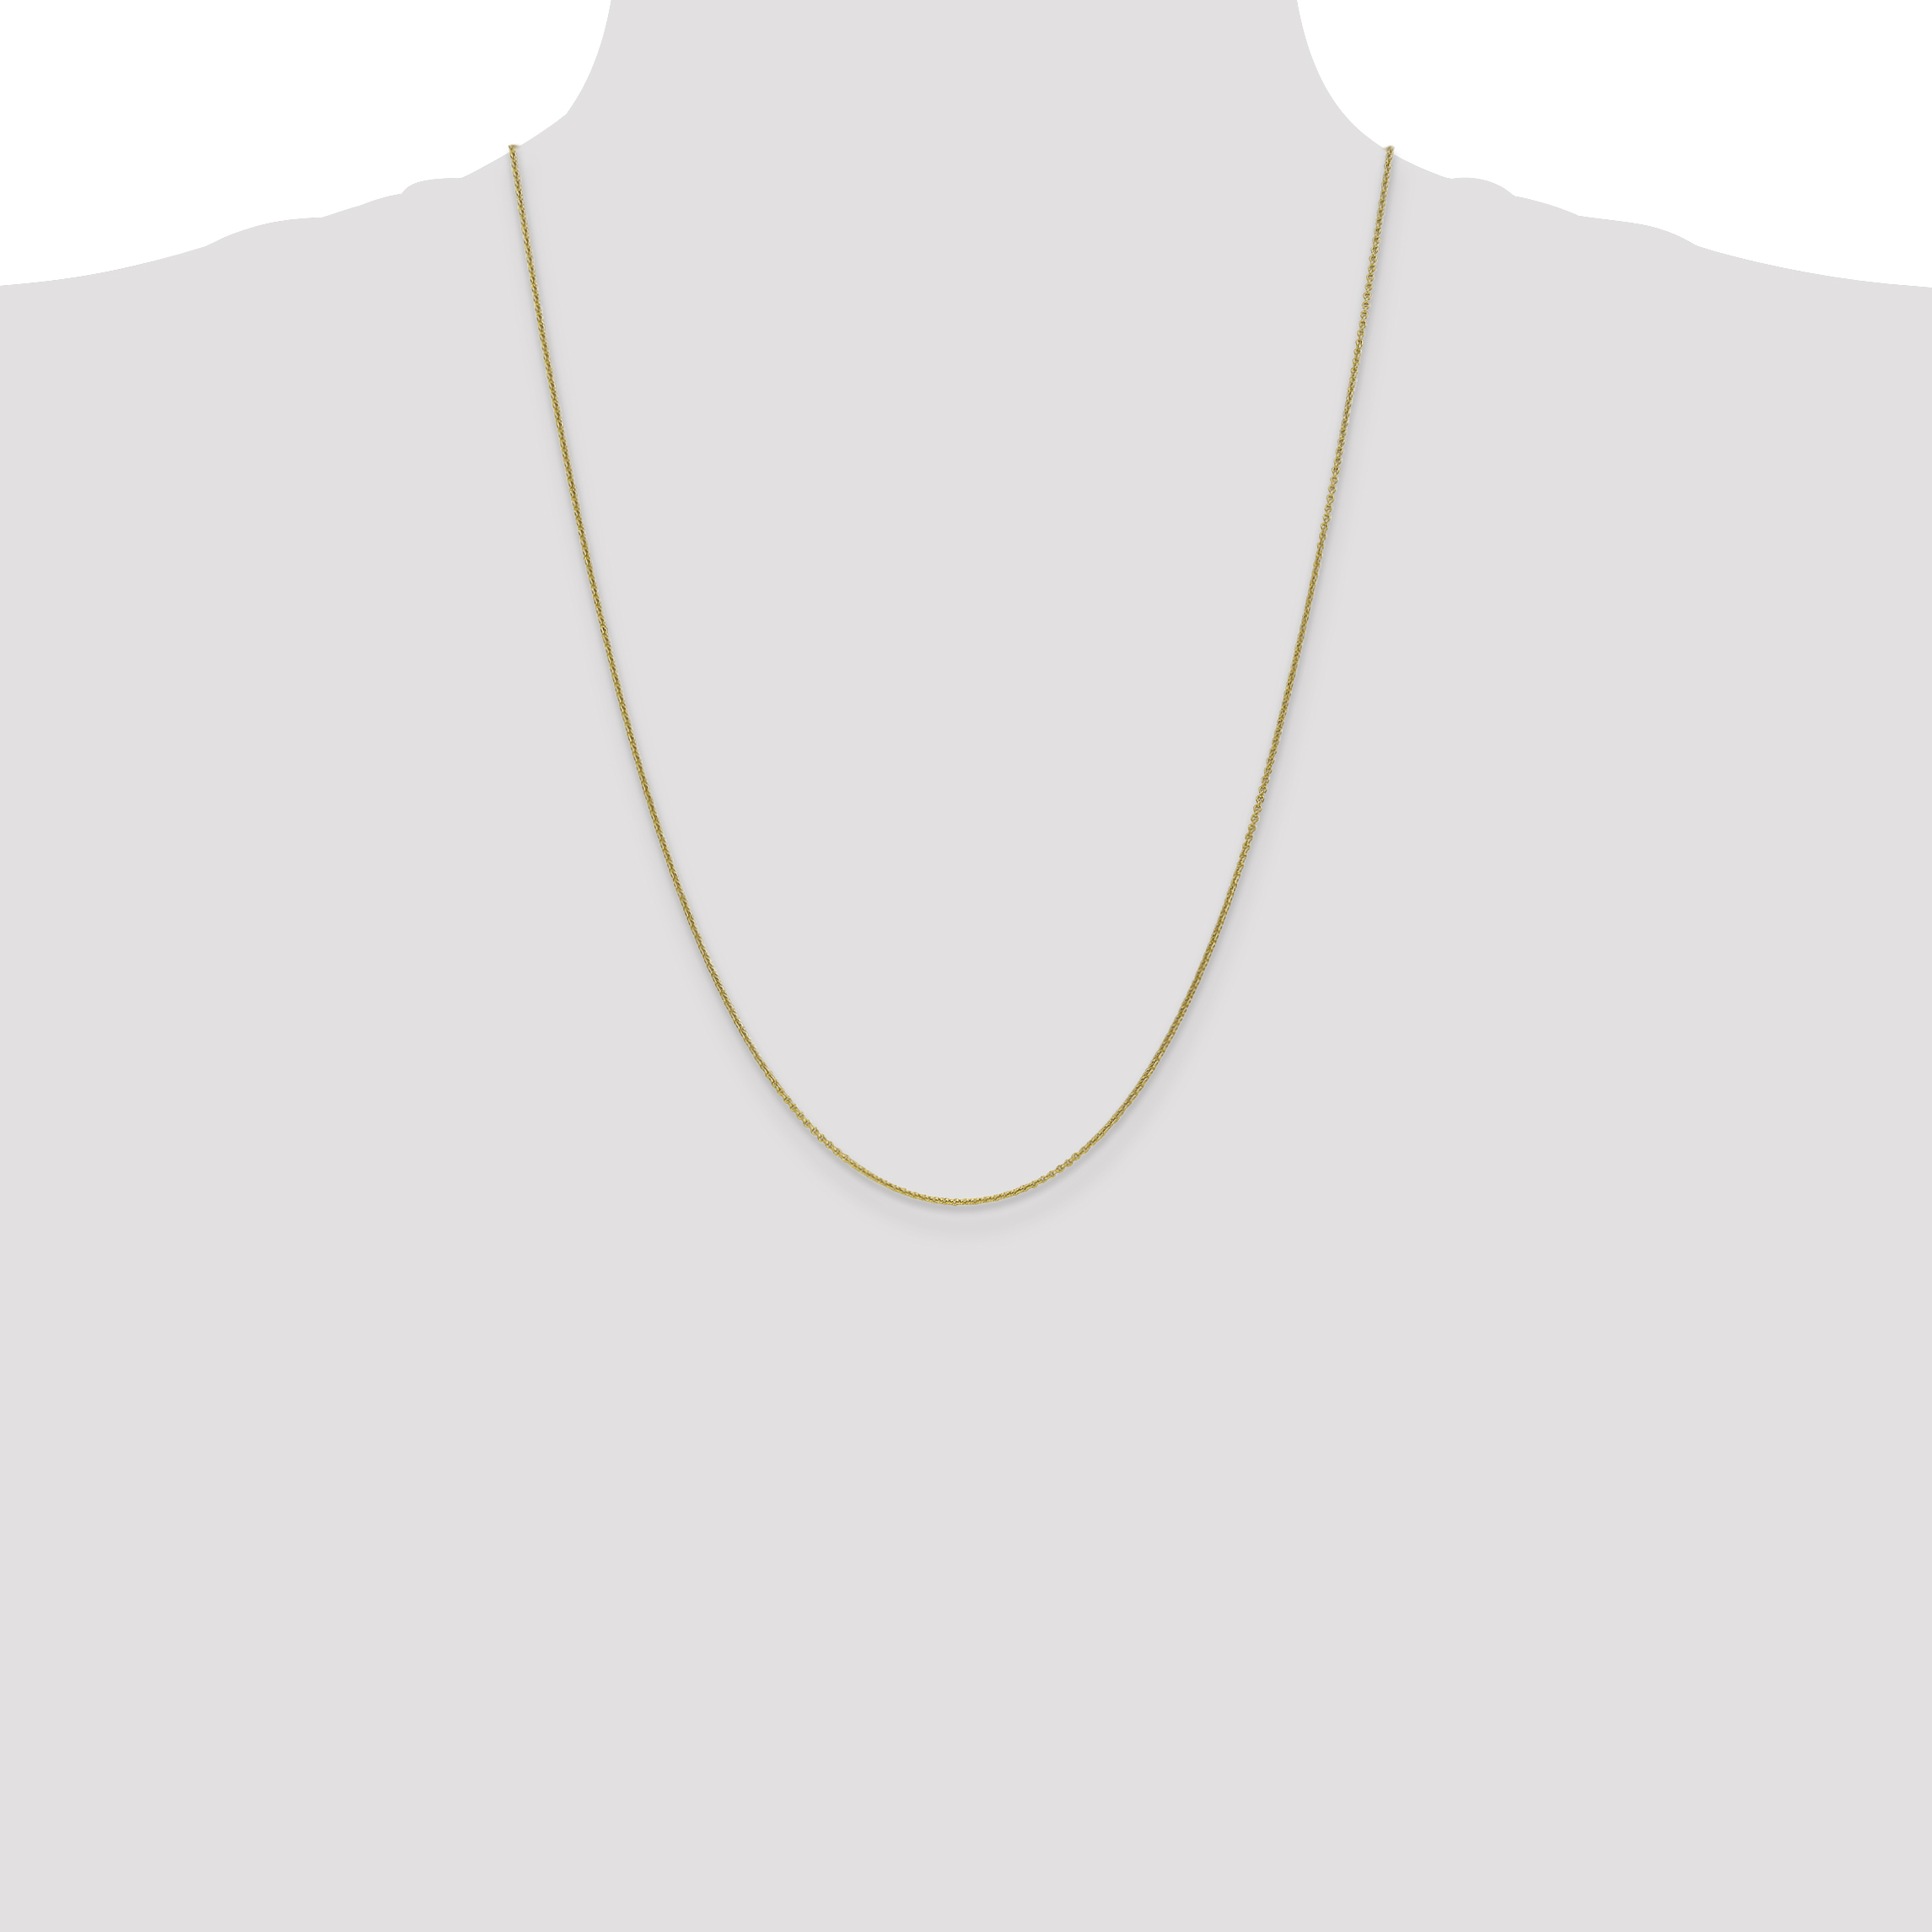 10k Yellow Gold .6mm Solid Link Cable Chain Necklace 16 Inch Pendant Charm Round Fine Jewelry For Women Gifts For Her